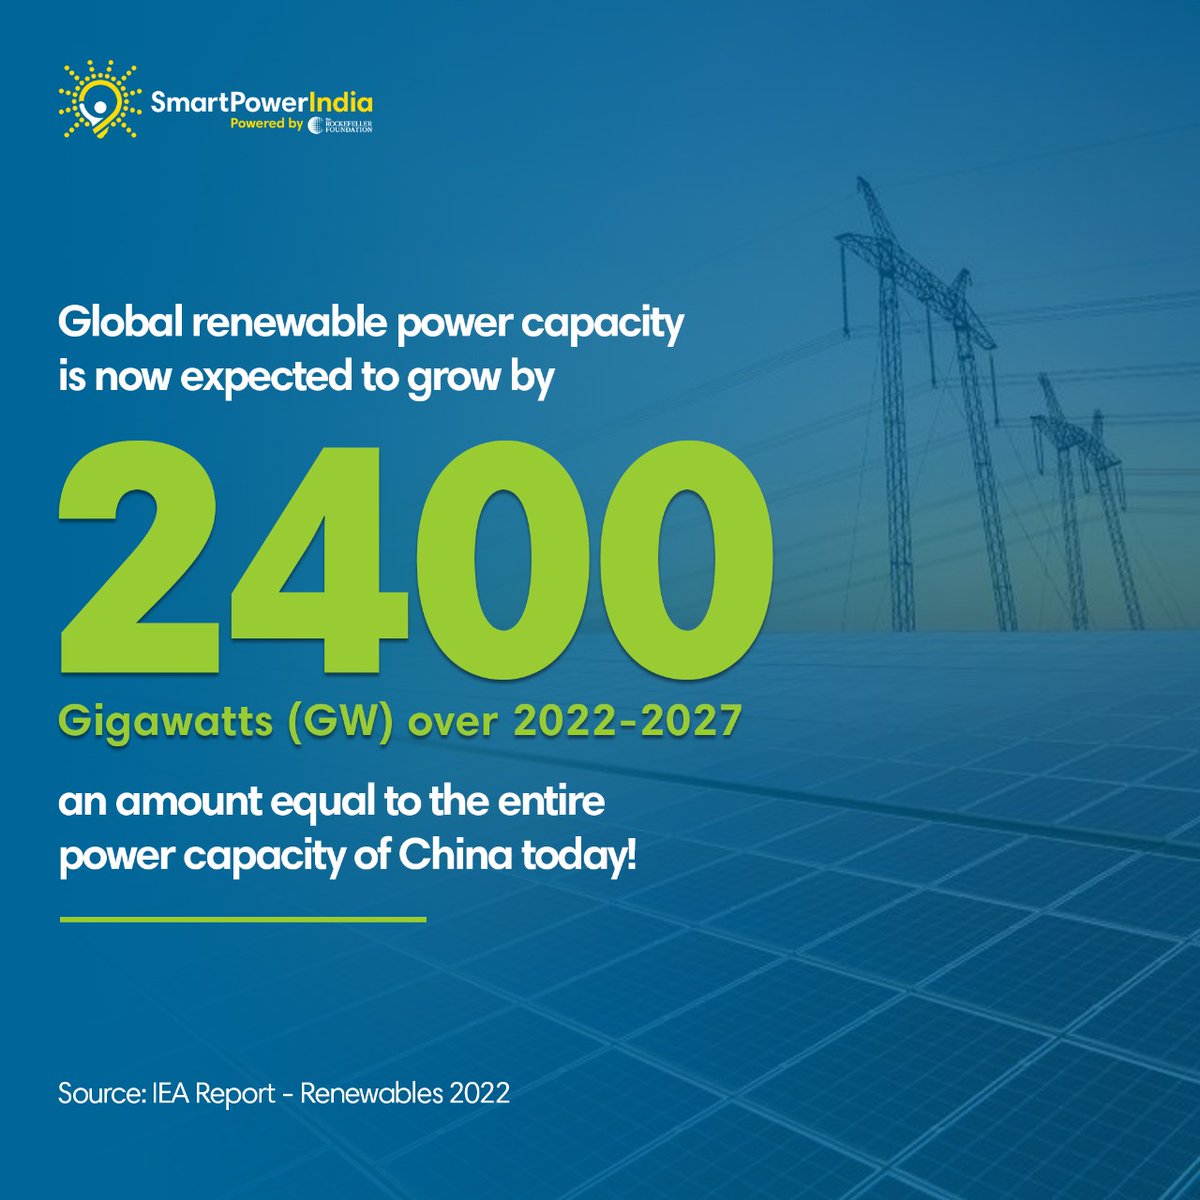 ⚡Renewables will overtake coal as world’s top energy source by 2025 according to @IEA. 👉The world is set to add as much renewable energy in the next five years as it did in the past two decades. #EnergyAccess #SolarEnergy #Solar #DRE #EnergyTransition iea.org/reports/renewa…